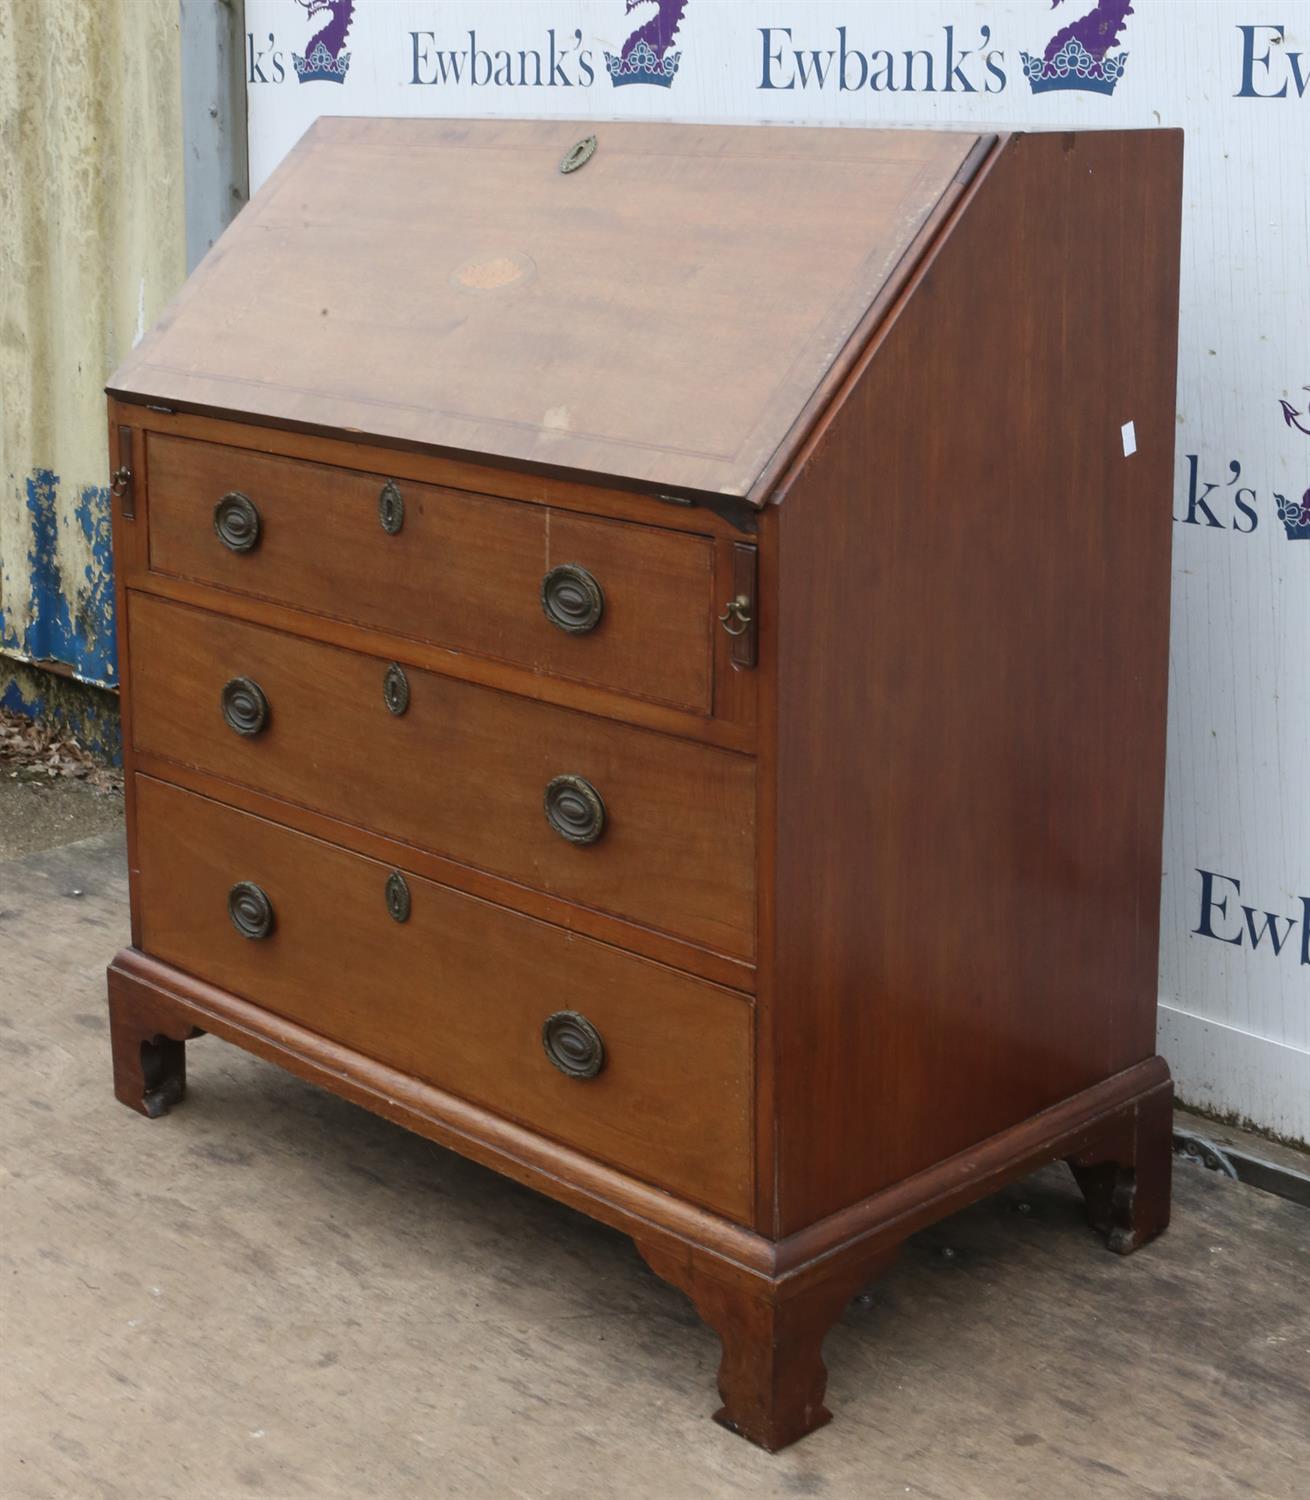 An Edwardian mahogany bureau, satinwood banded, the interior with a cupboard door, - Image 2 of 5